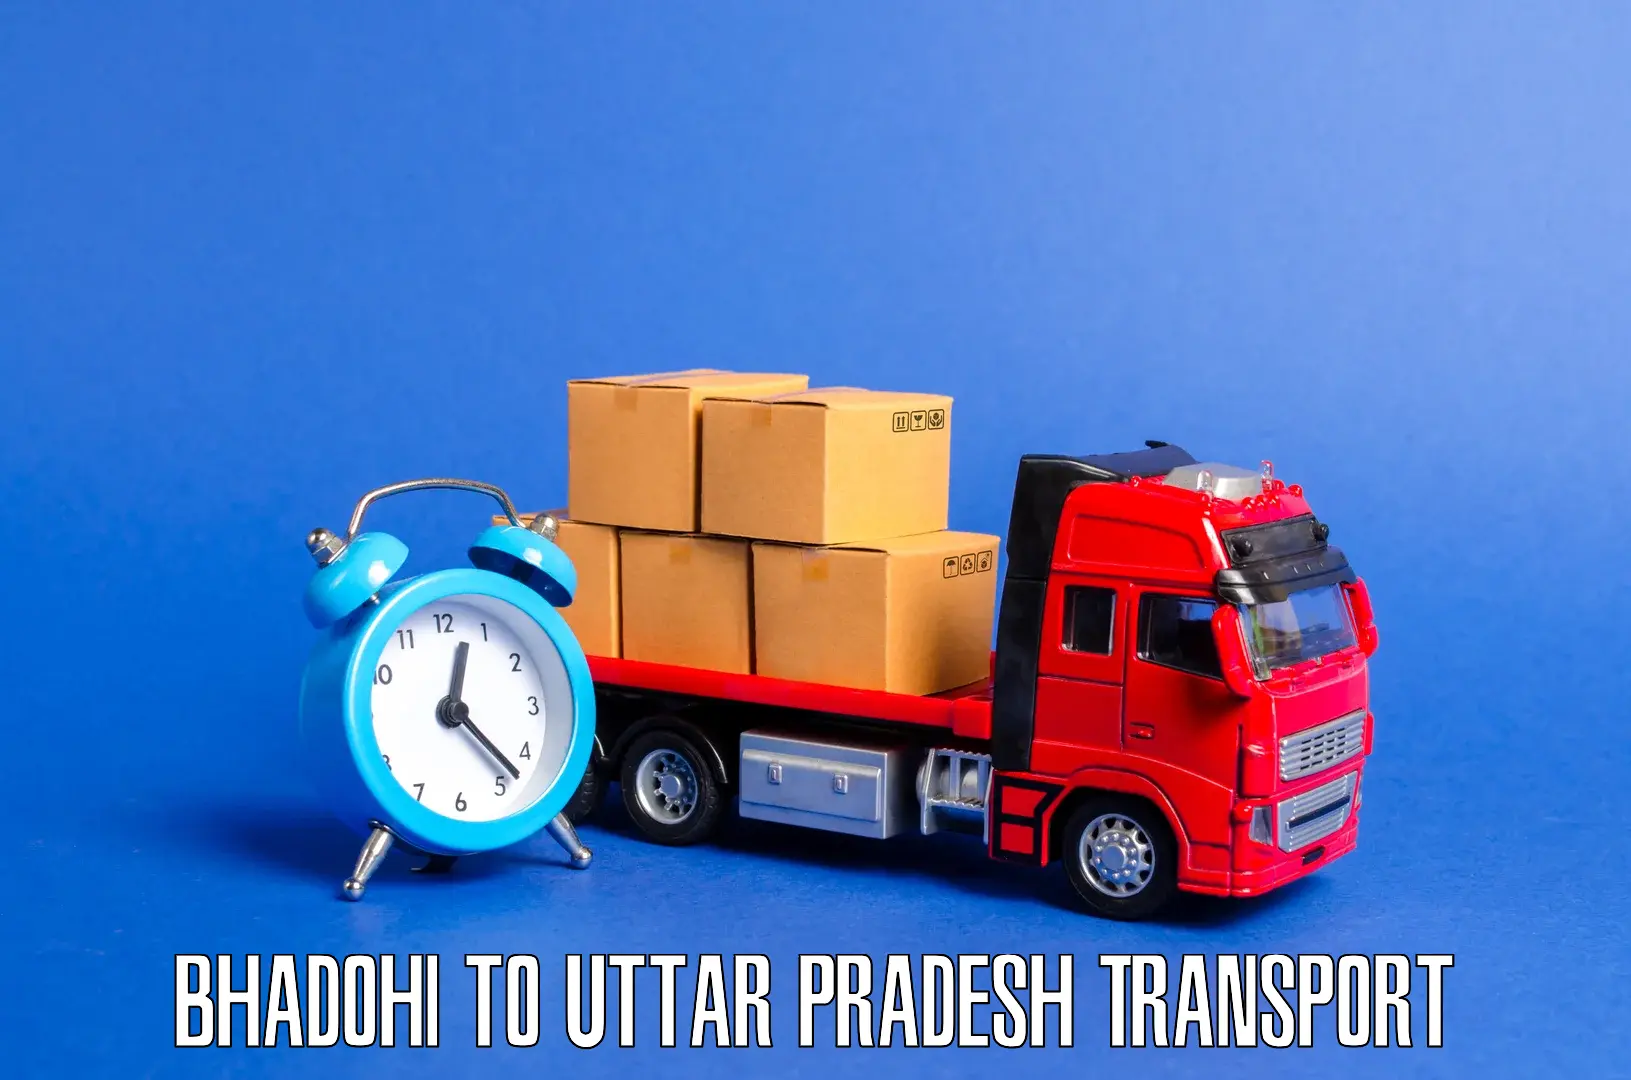 Transportation services in Bhadohi to Lalitpur